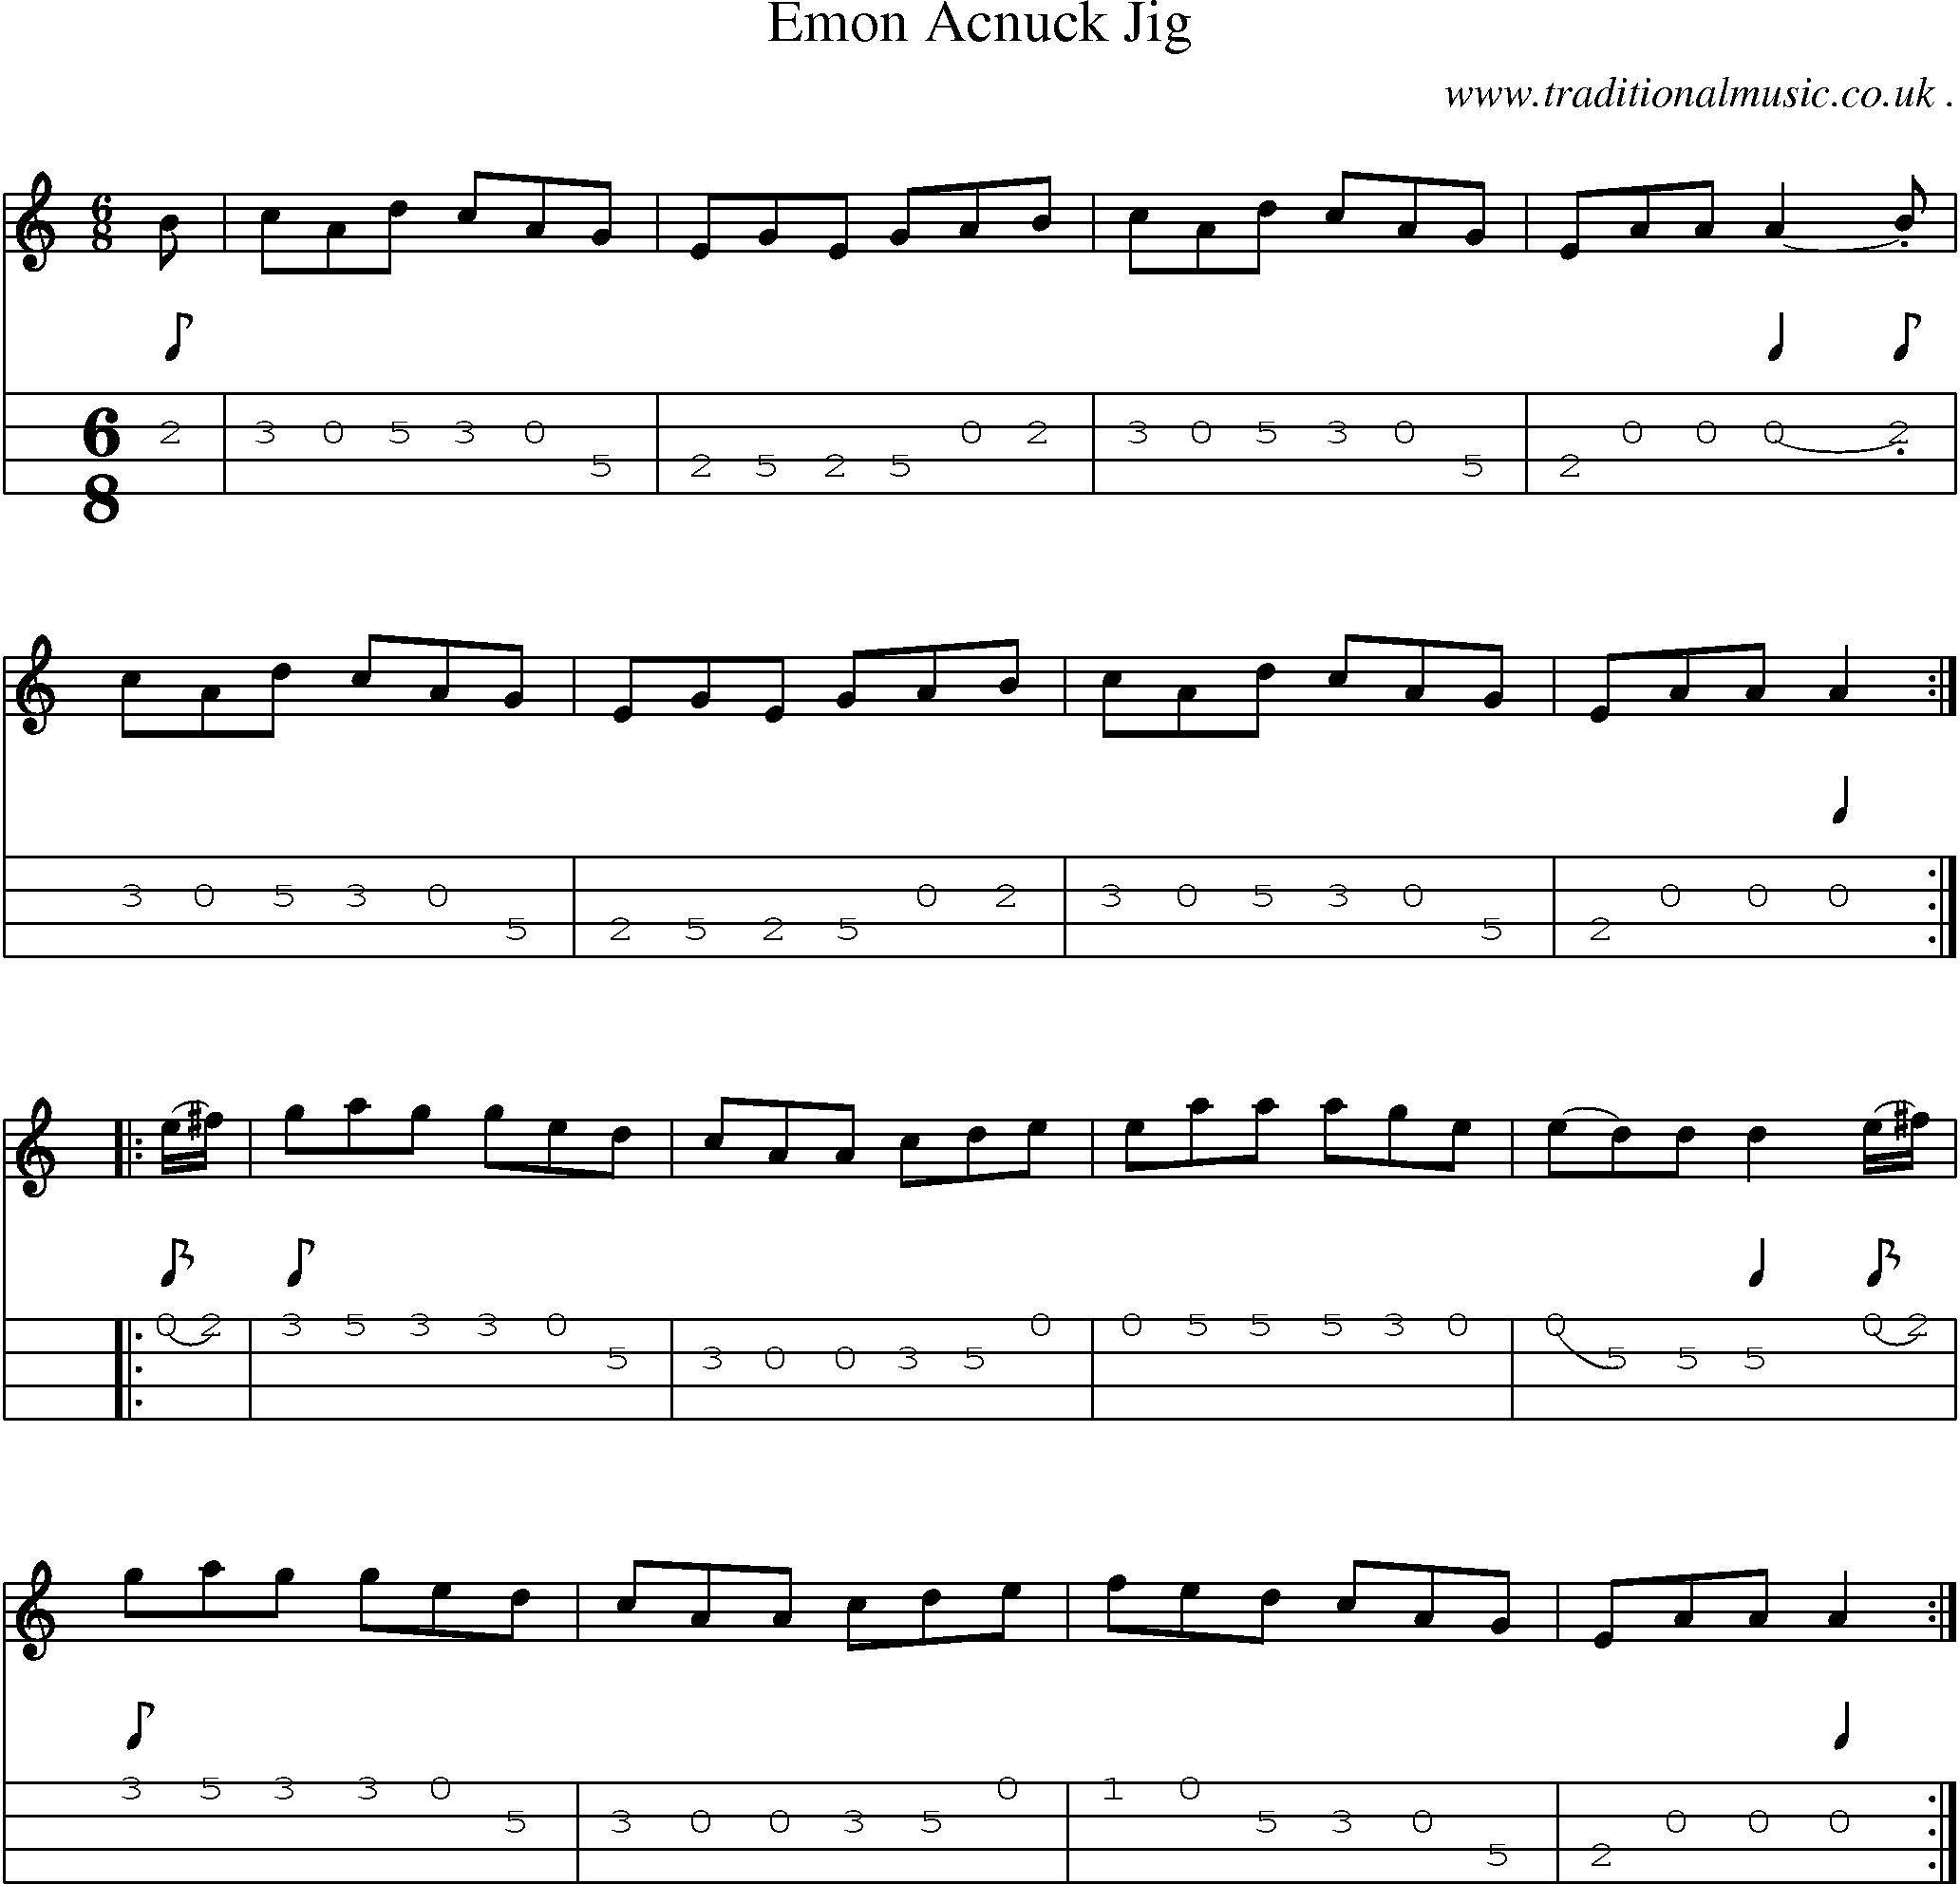 Sheet-Music and Mandolin Tabs for Emon Acnuck Jig